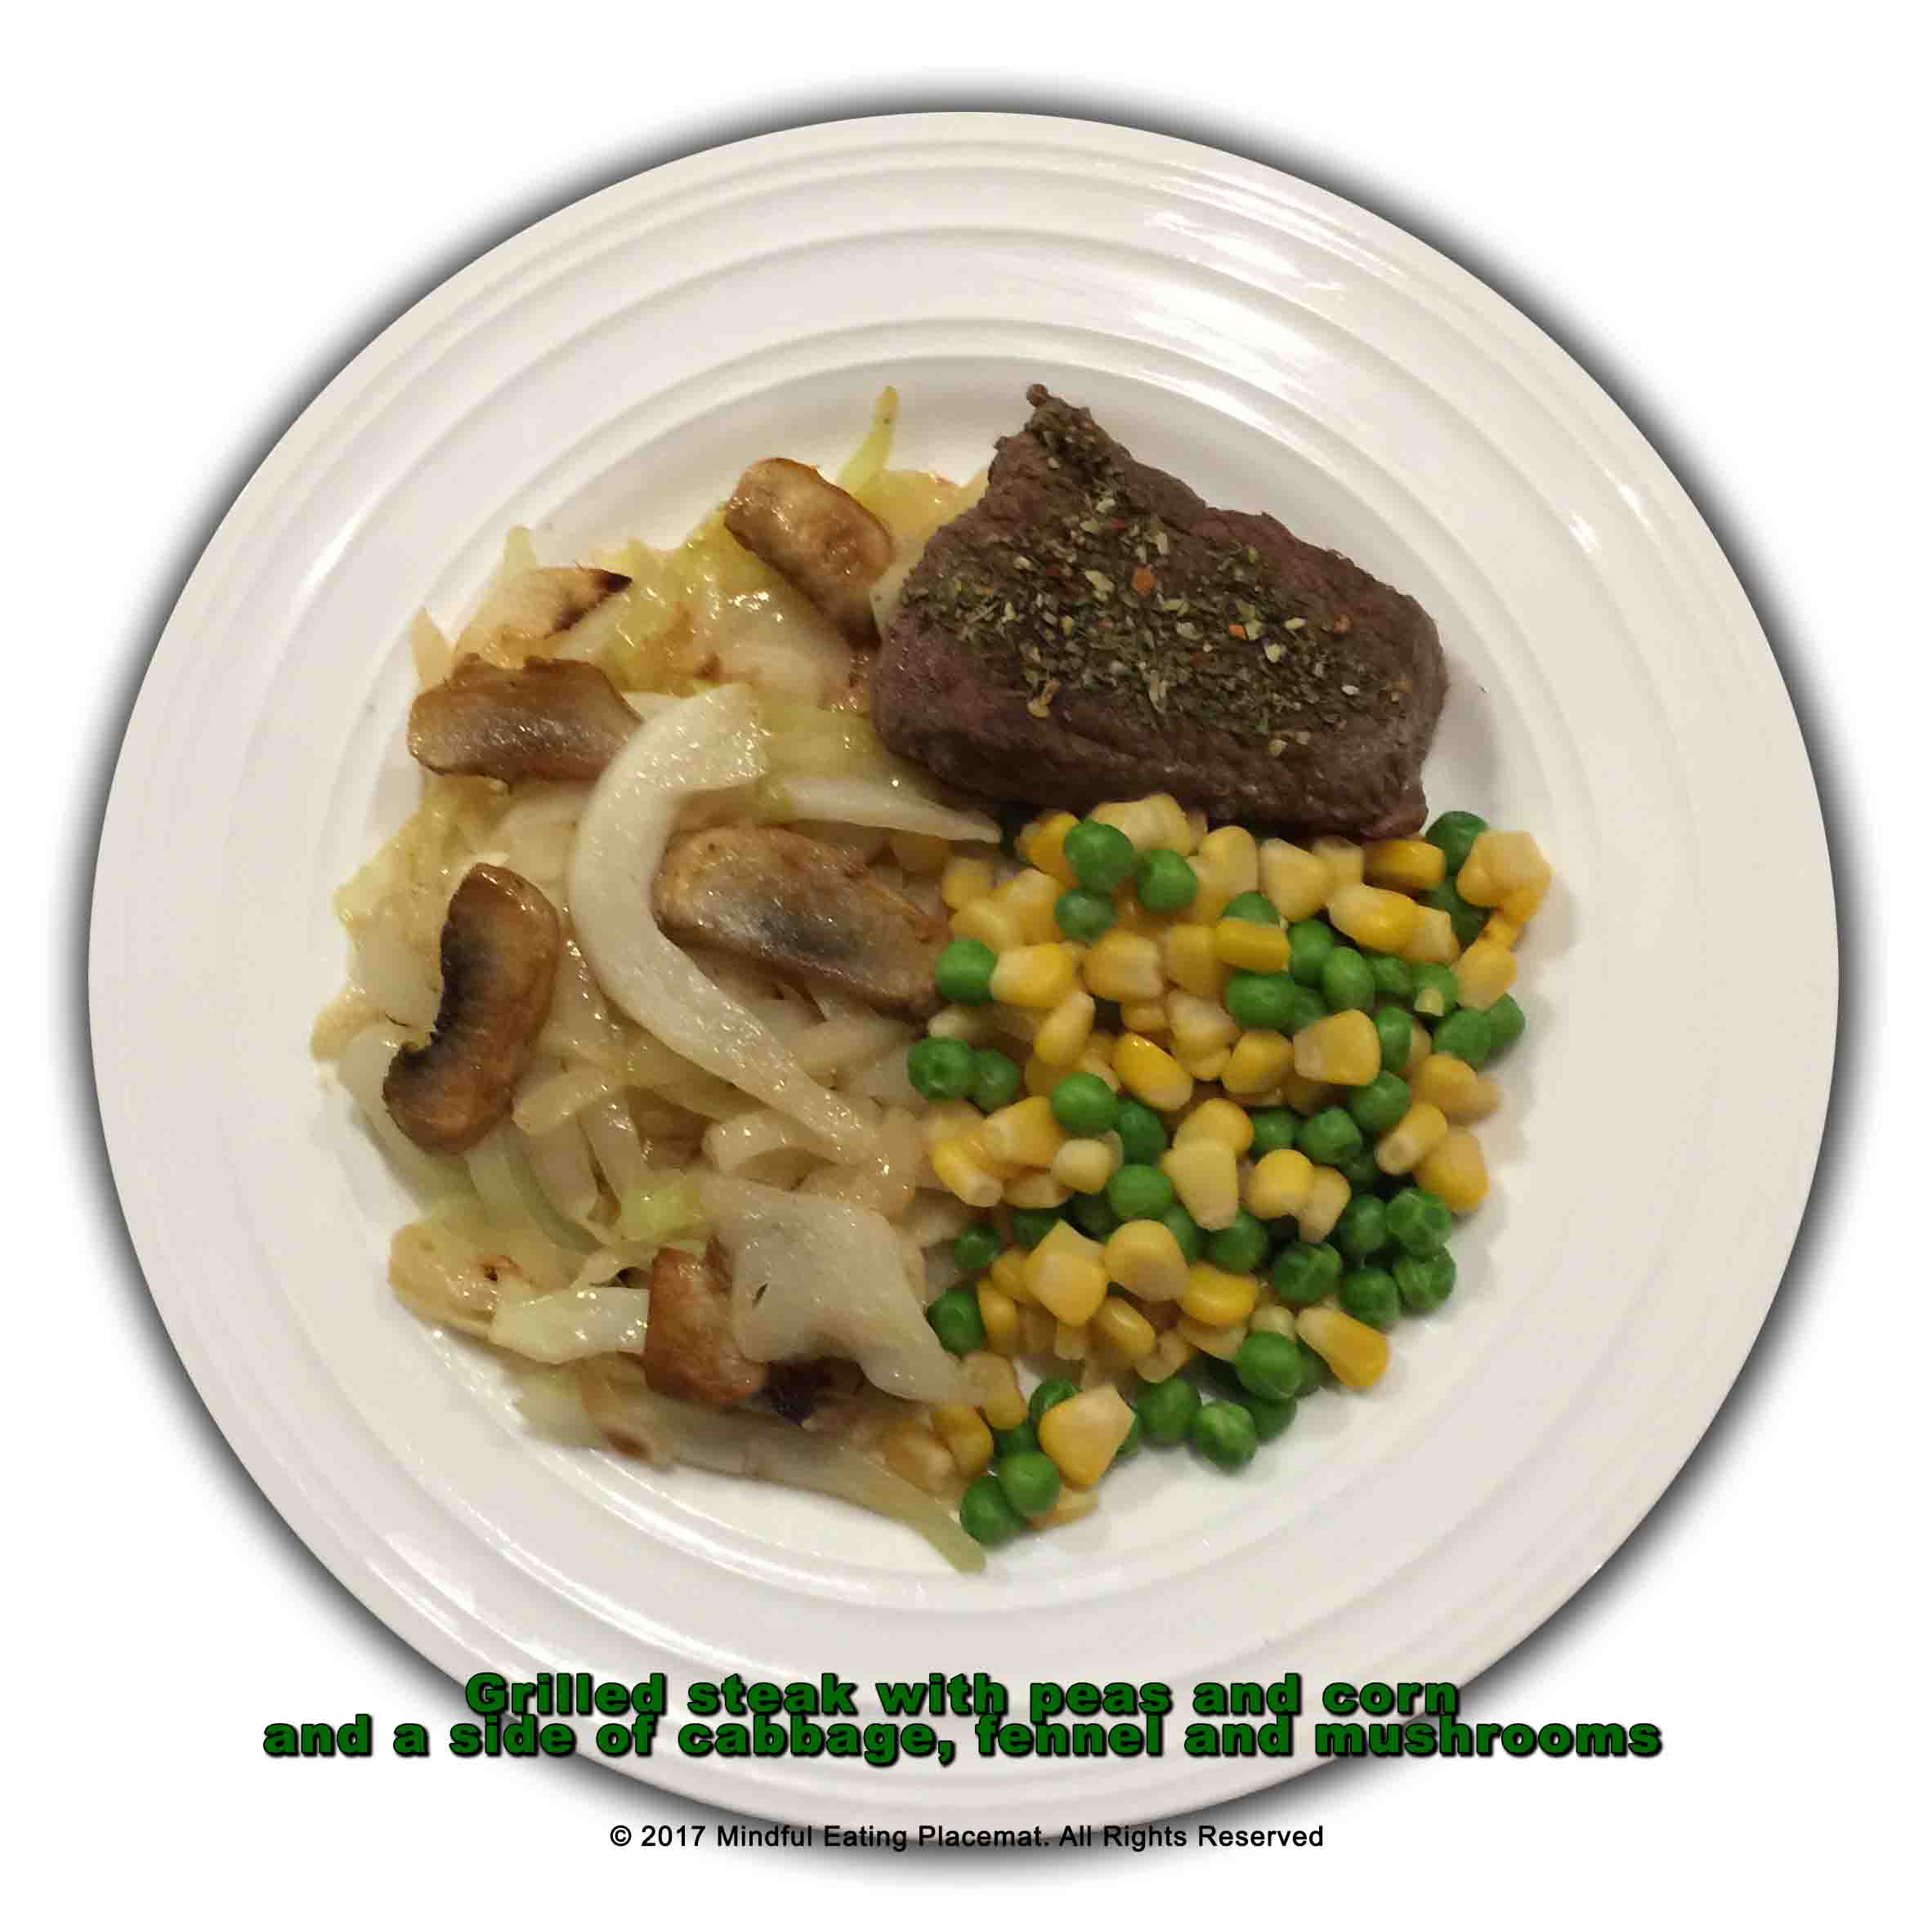 Steak with corn and peas with stir-fried cabbage, fennel and mushrooms 